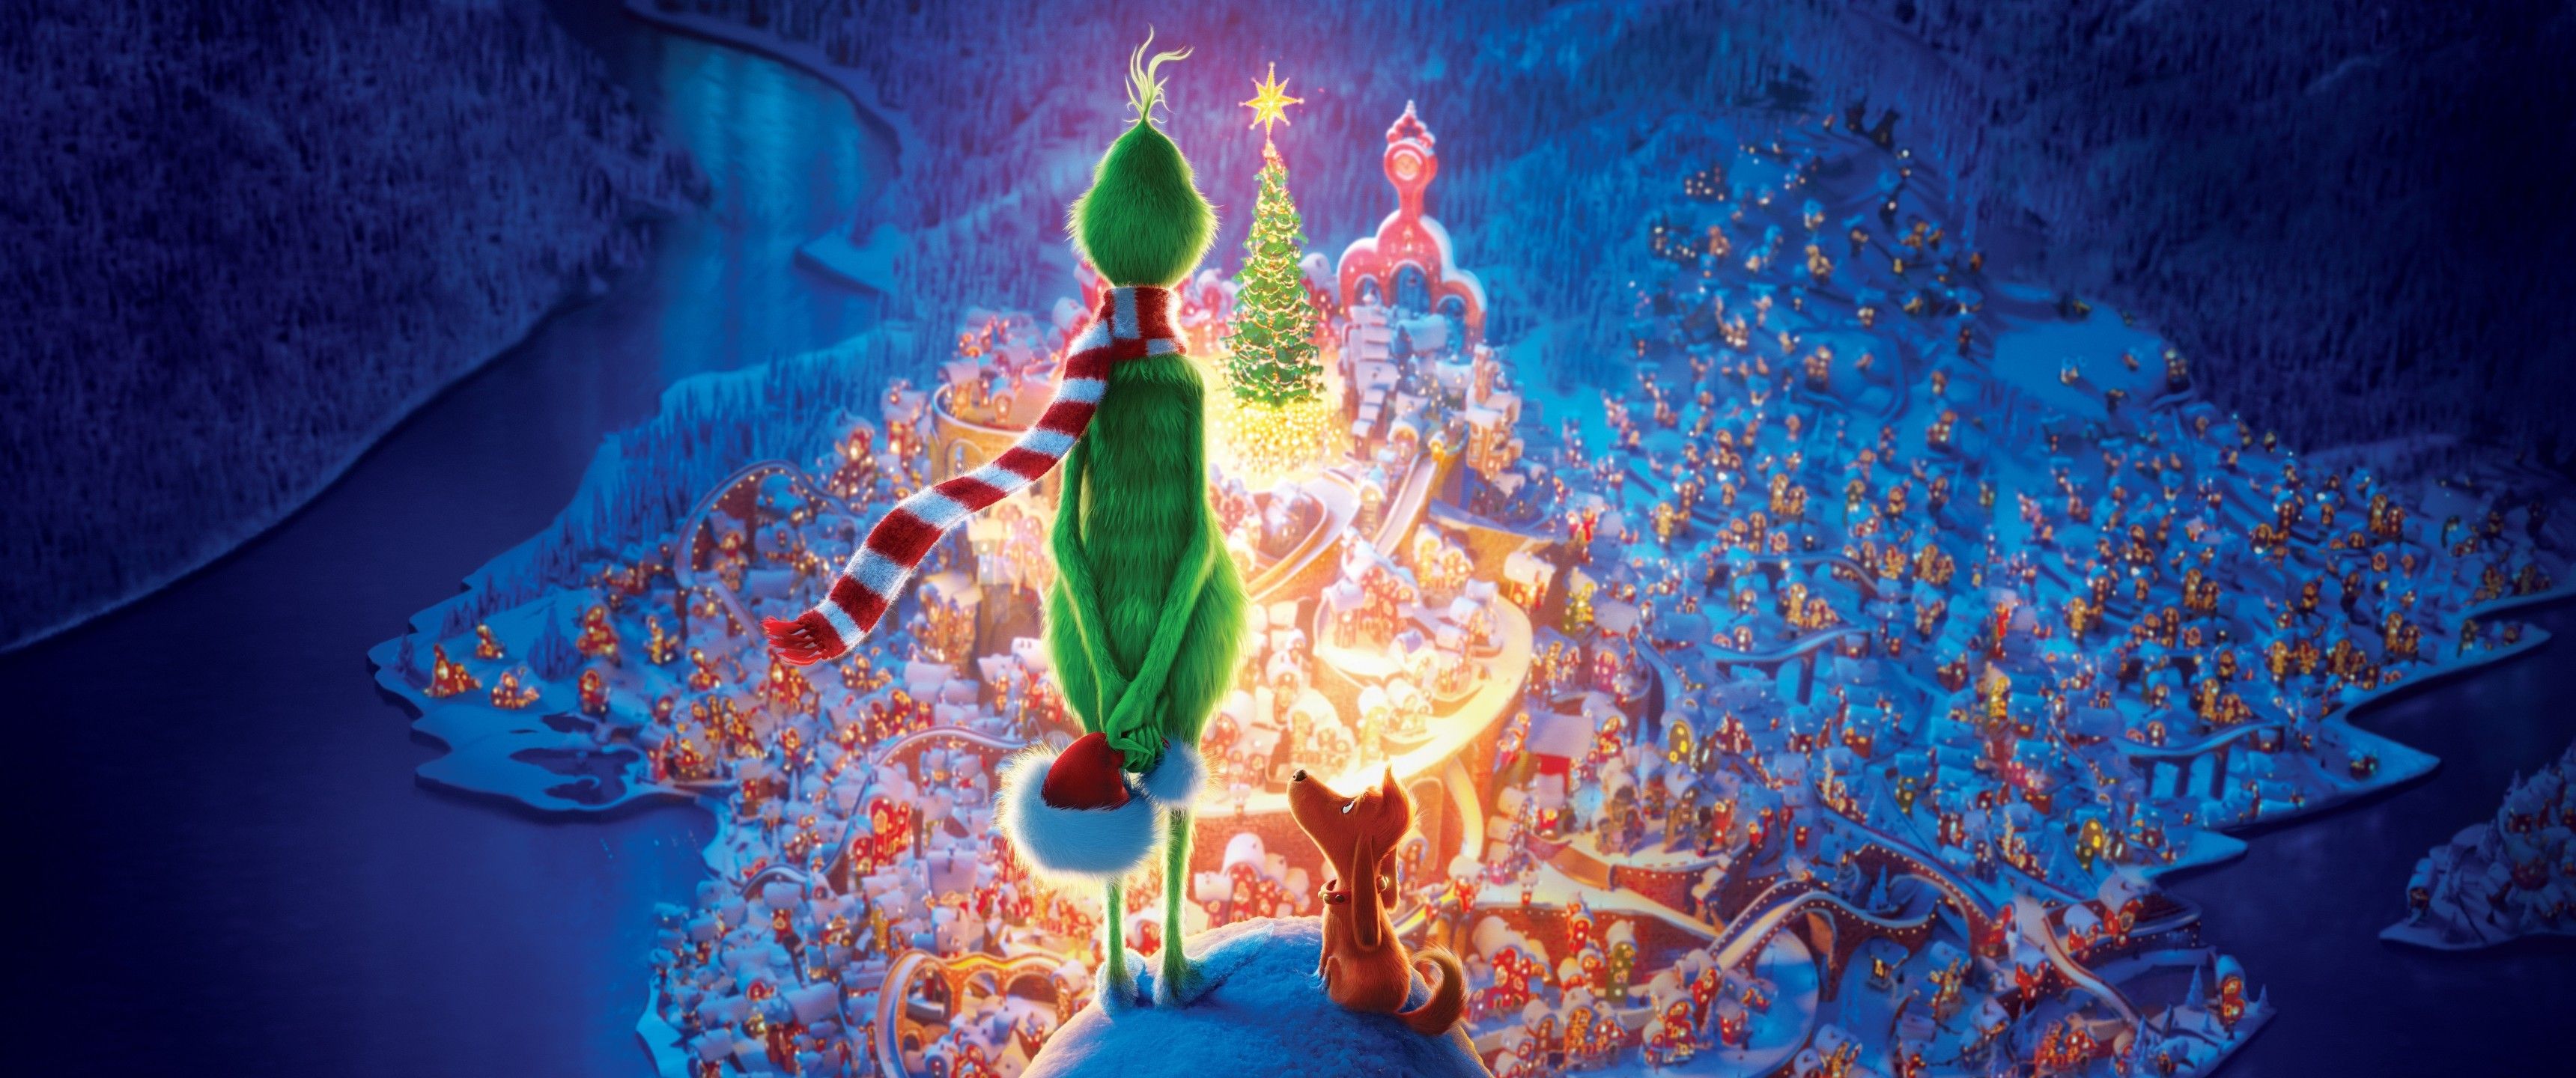 Download 3440x1440 The Grinch, Animation, Christmas Wallpaper